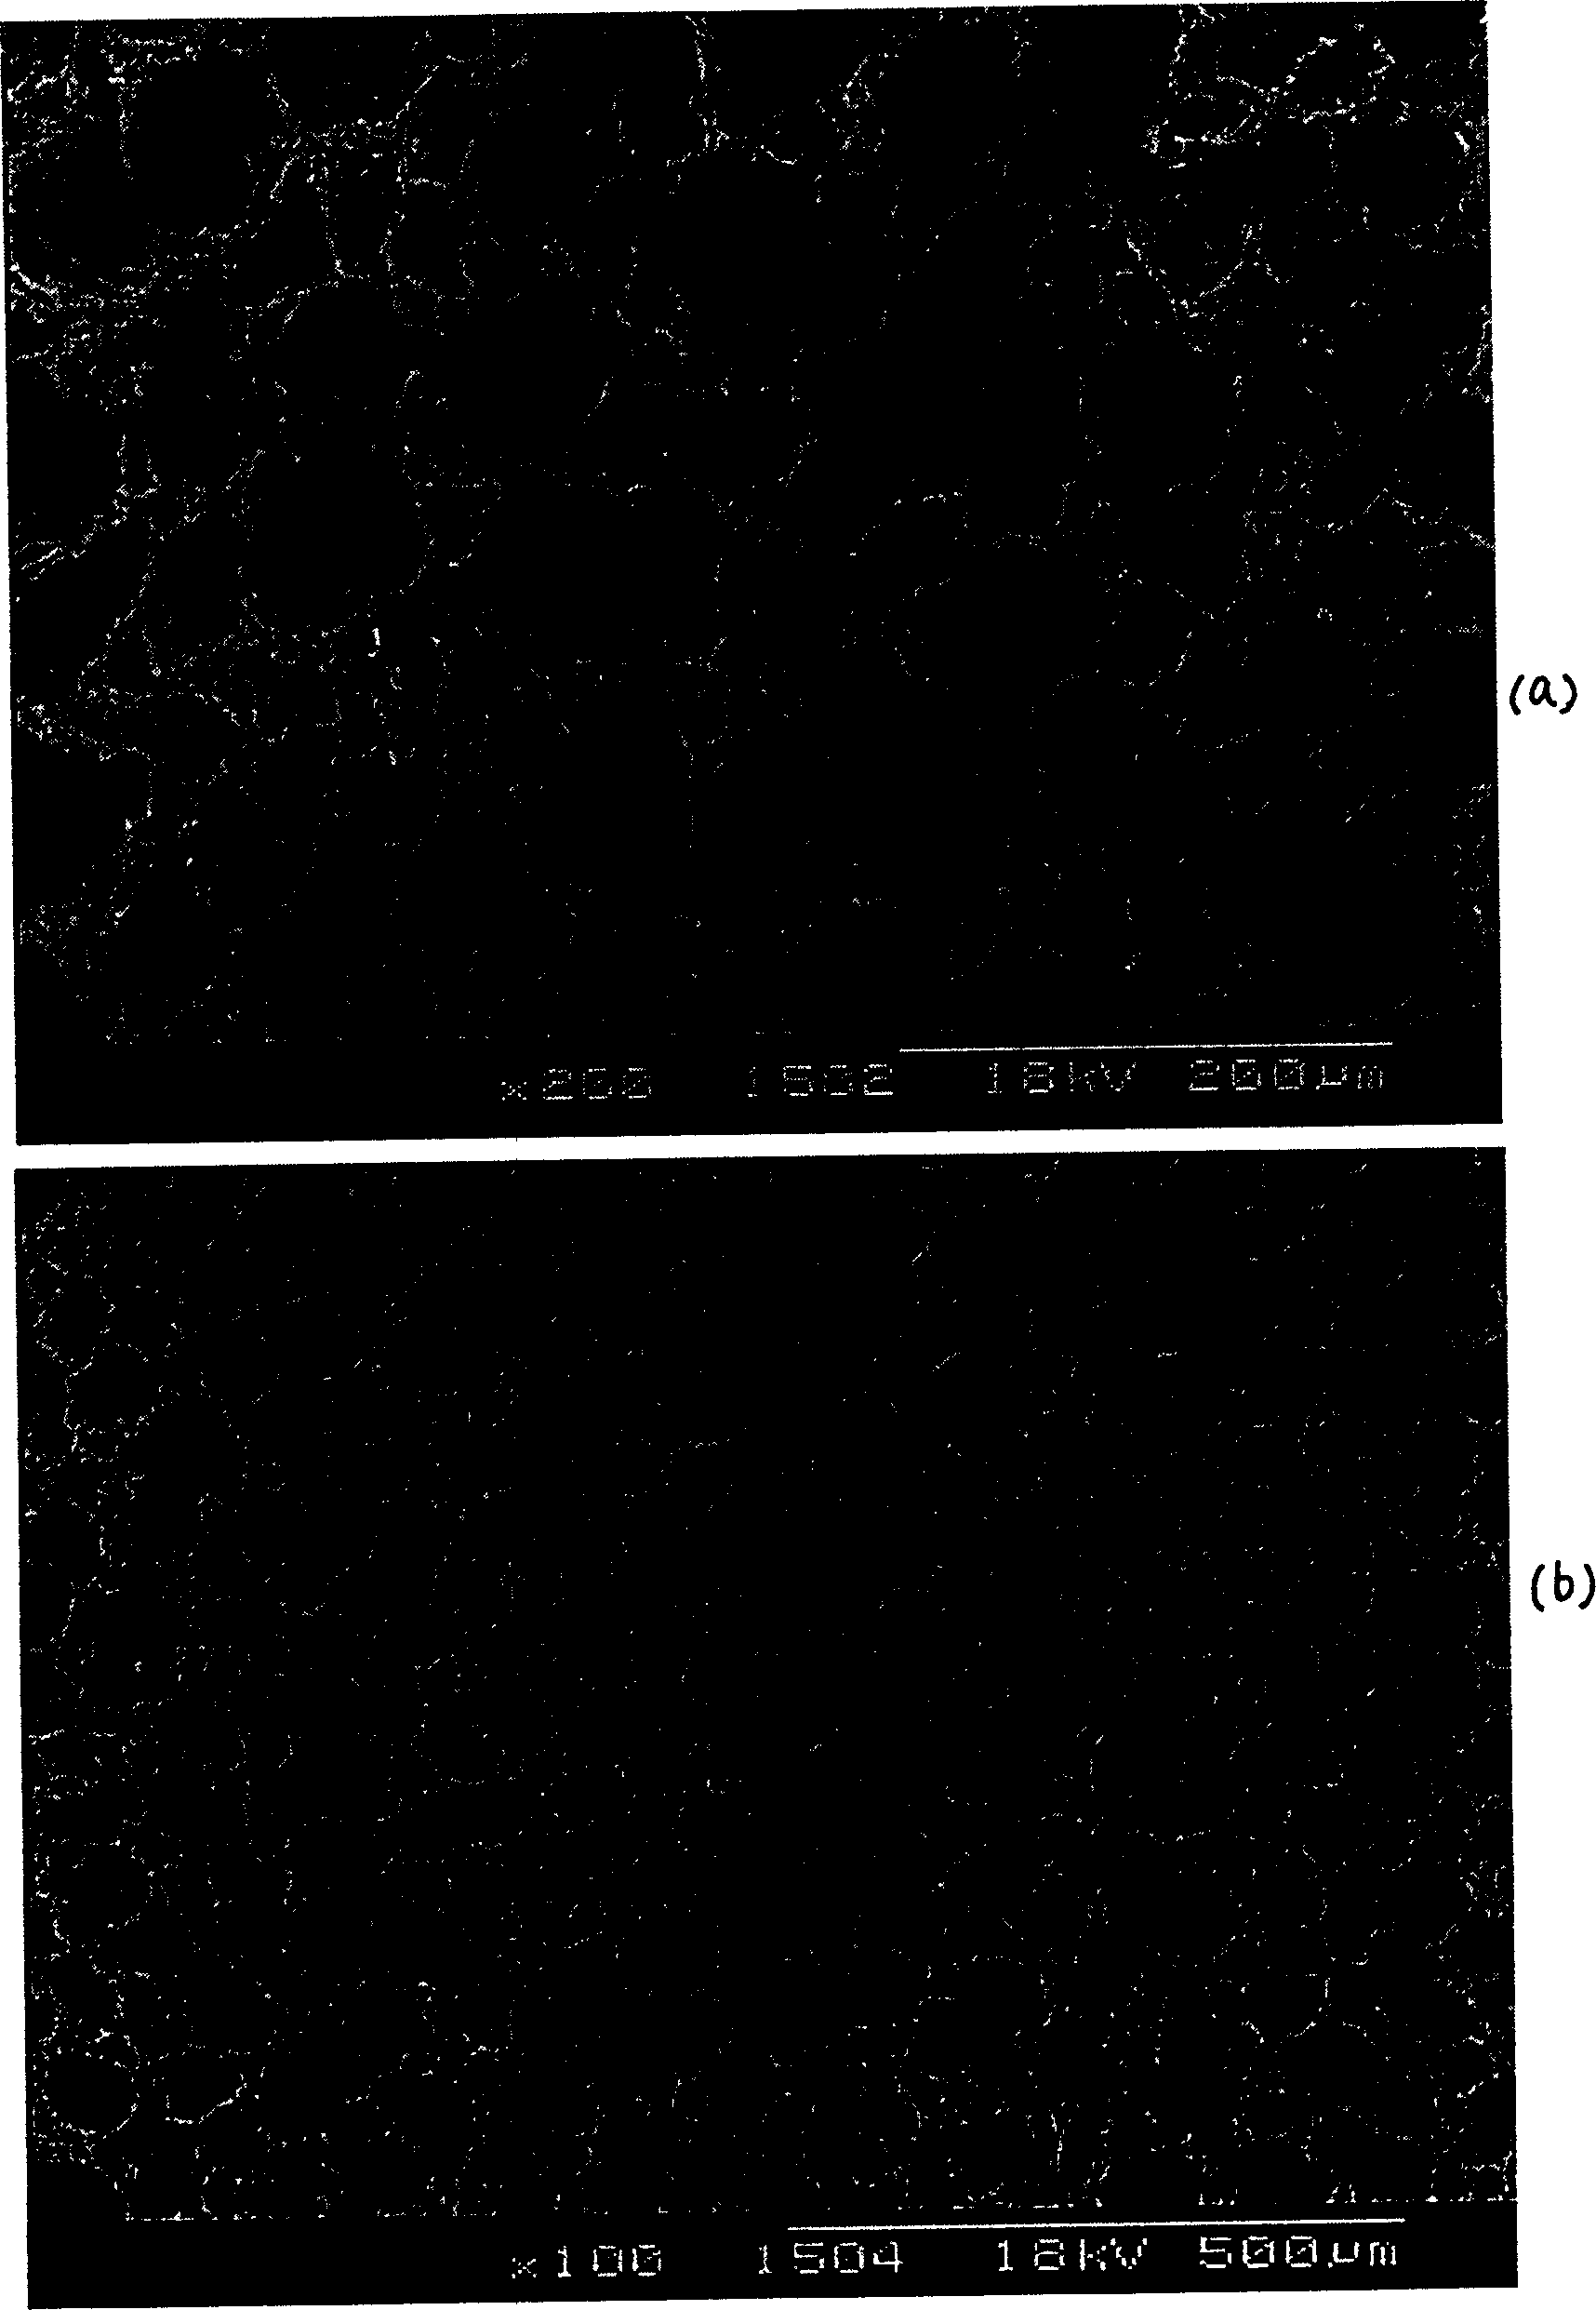 Method for preparing organic and inorganic nanometer composite organization engineering stent material by using thermal phase separation